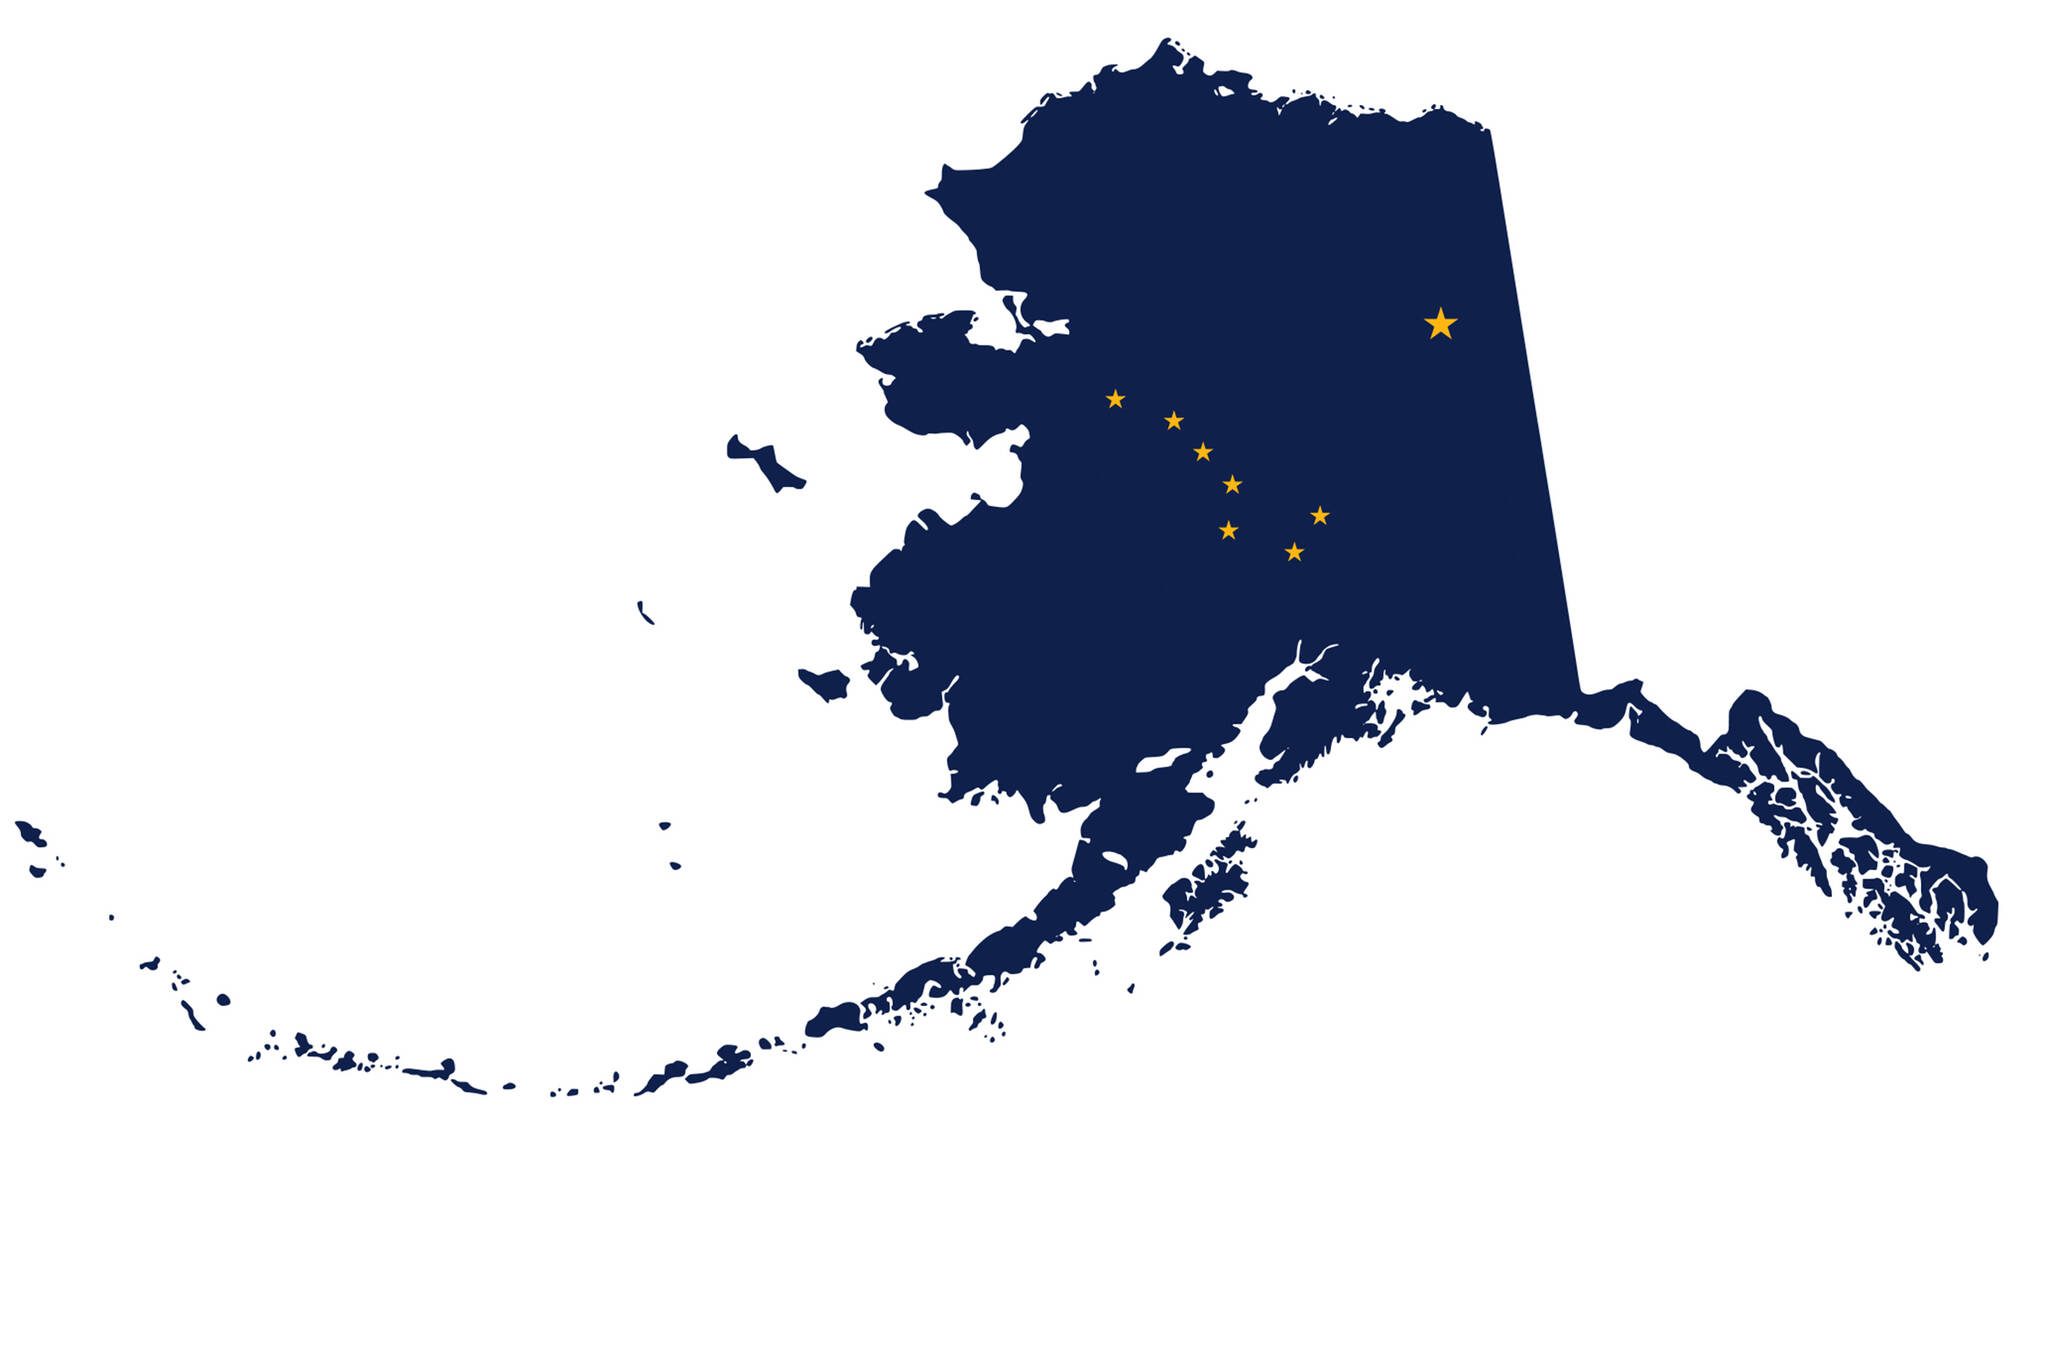 This image available under the Creative Commons license shows the outline of the state of Alaska filled with the pattern of the state flag. The state on Thursday reported a modest population growth between April 2020 and July 2021. It’s the first time since 2016 the state has reported a population increase. (